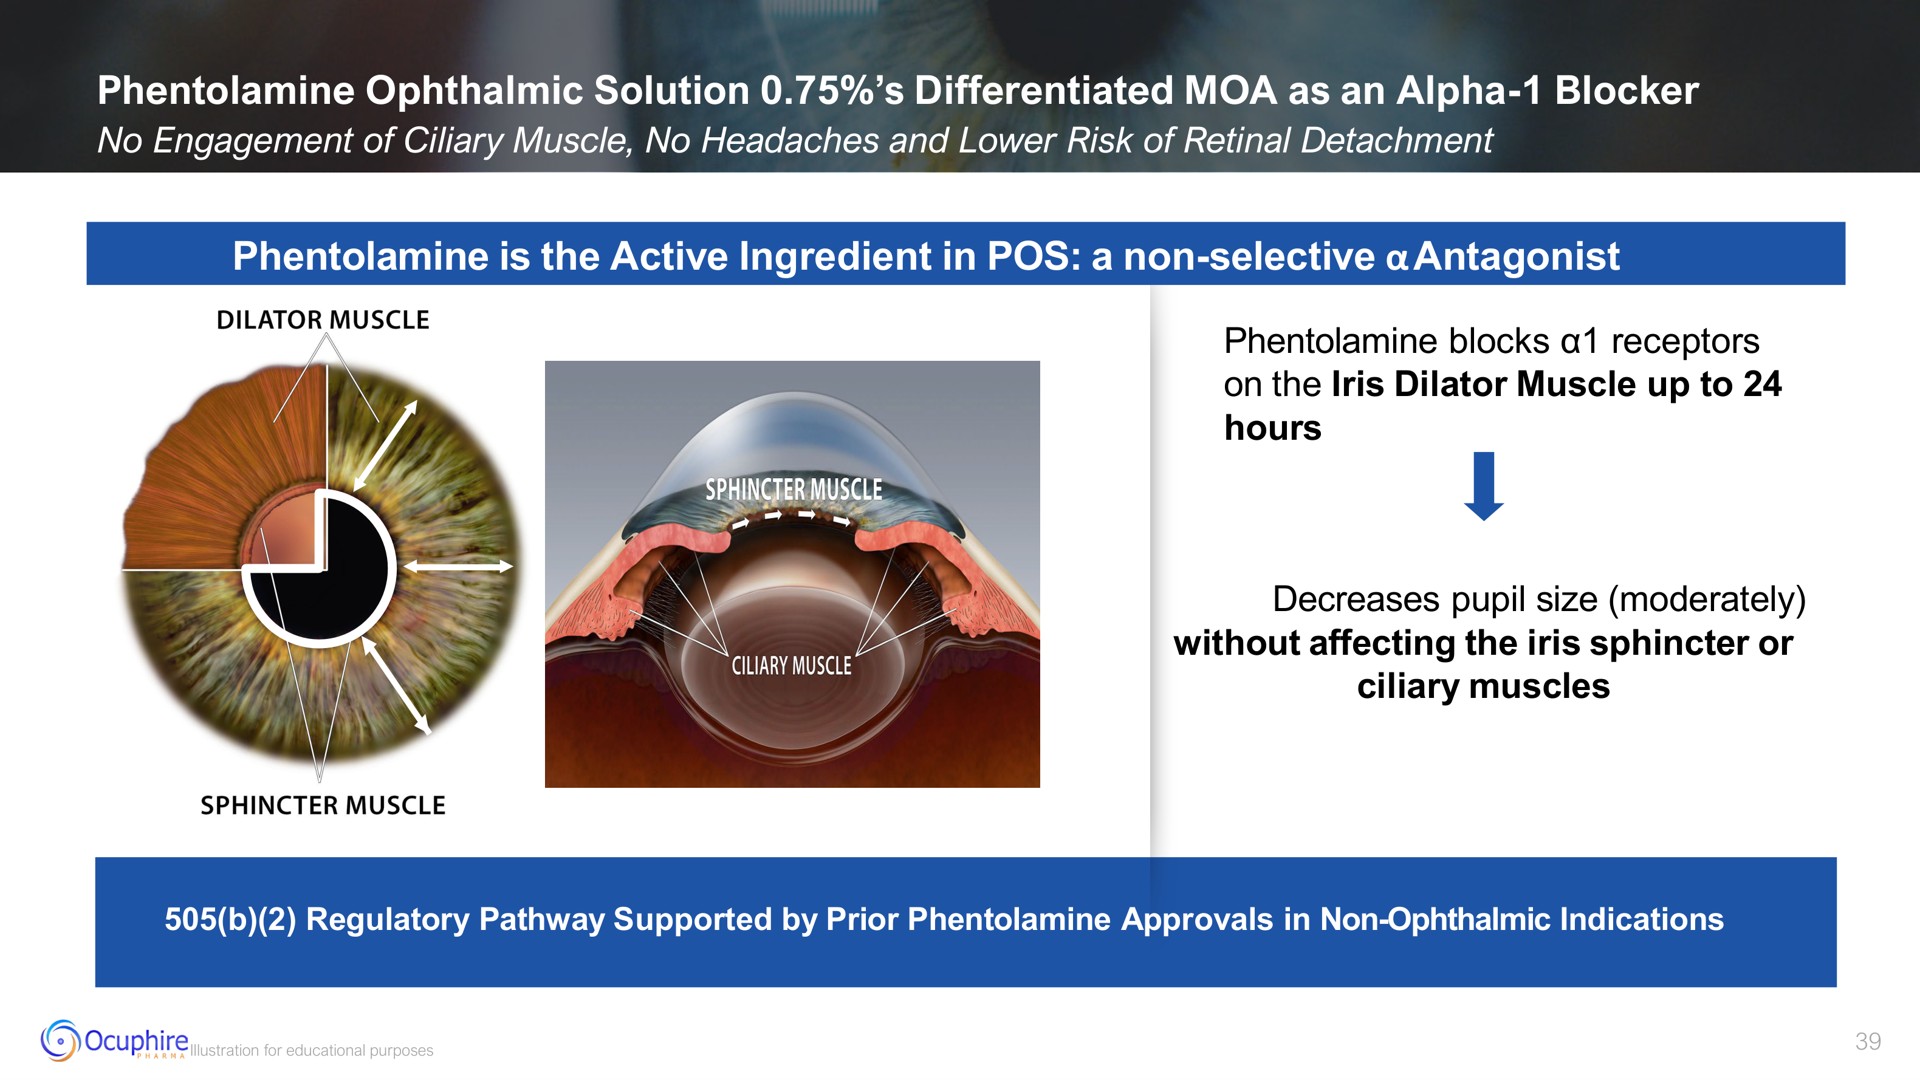 ophthalmic solution differentiated as an alpha blocker is the active ingredient in pos a non selective antagonist | Ocuphire Pharma